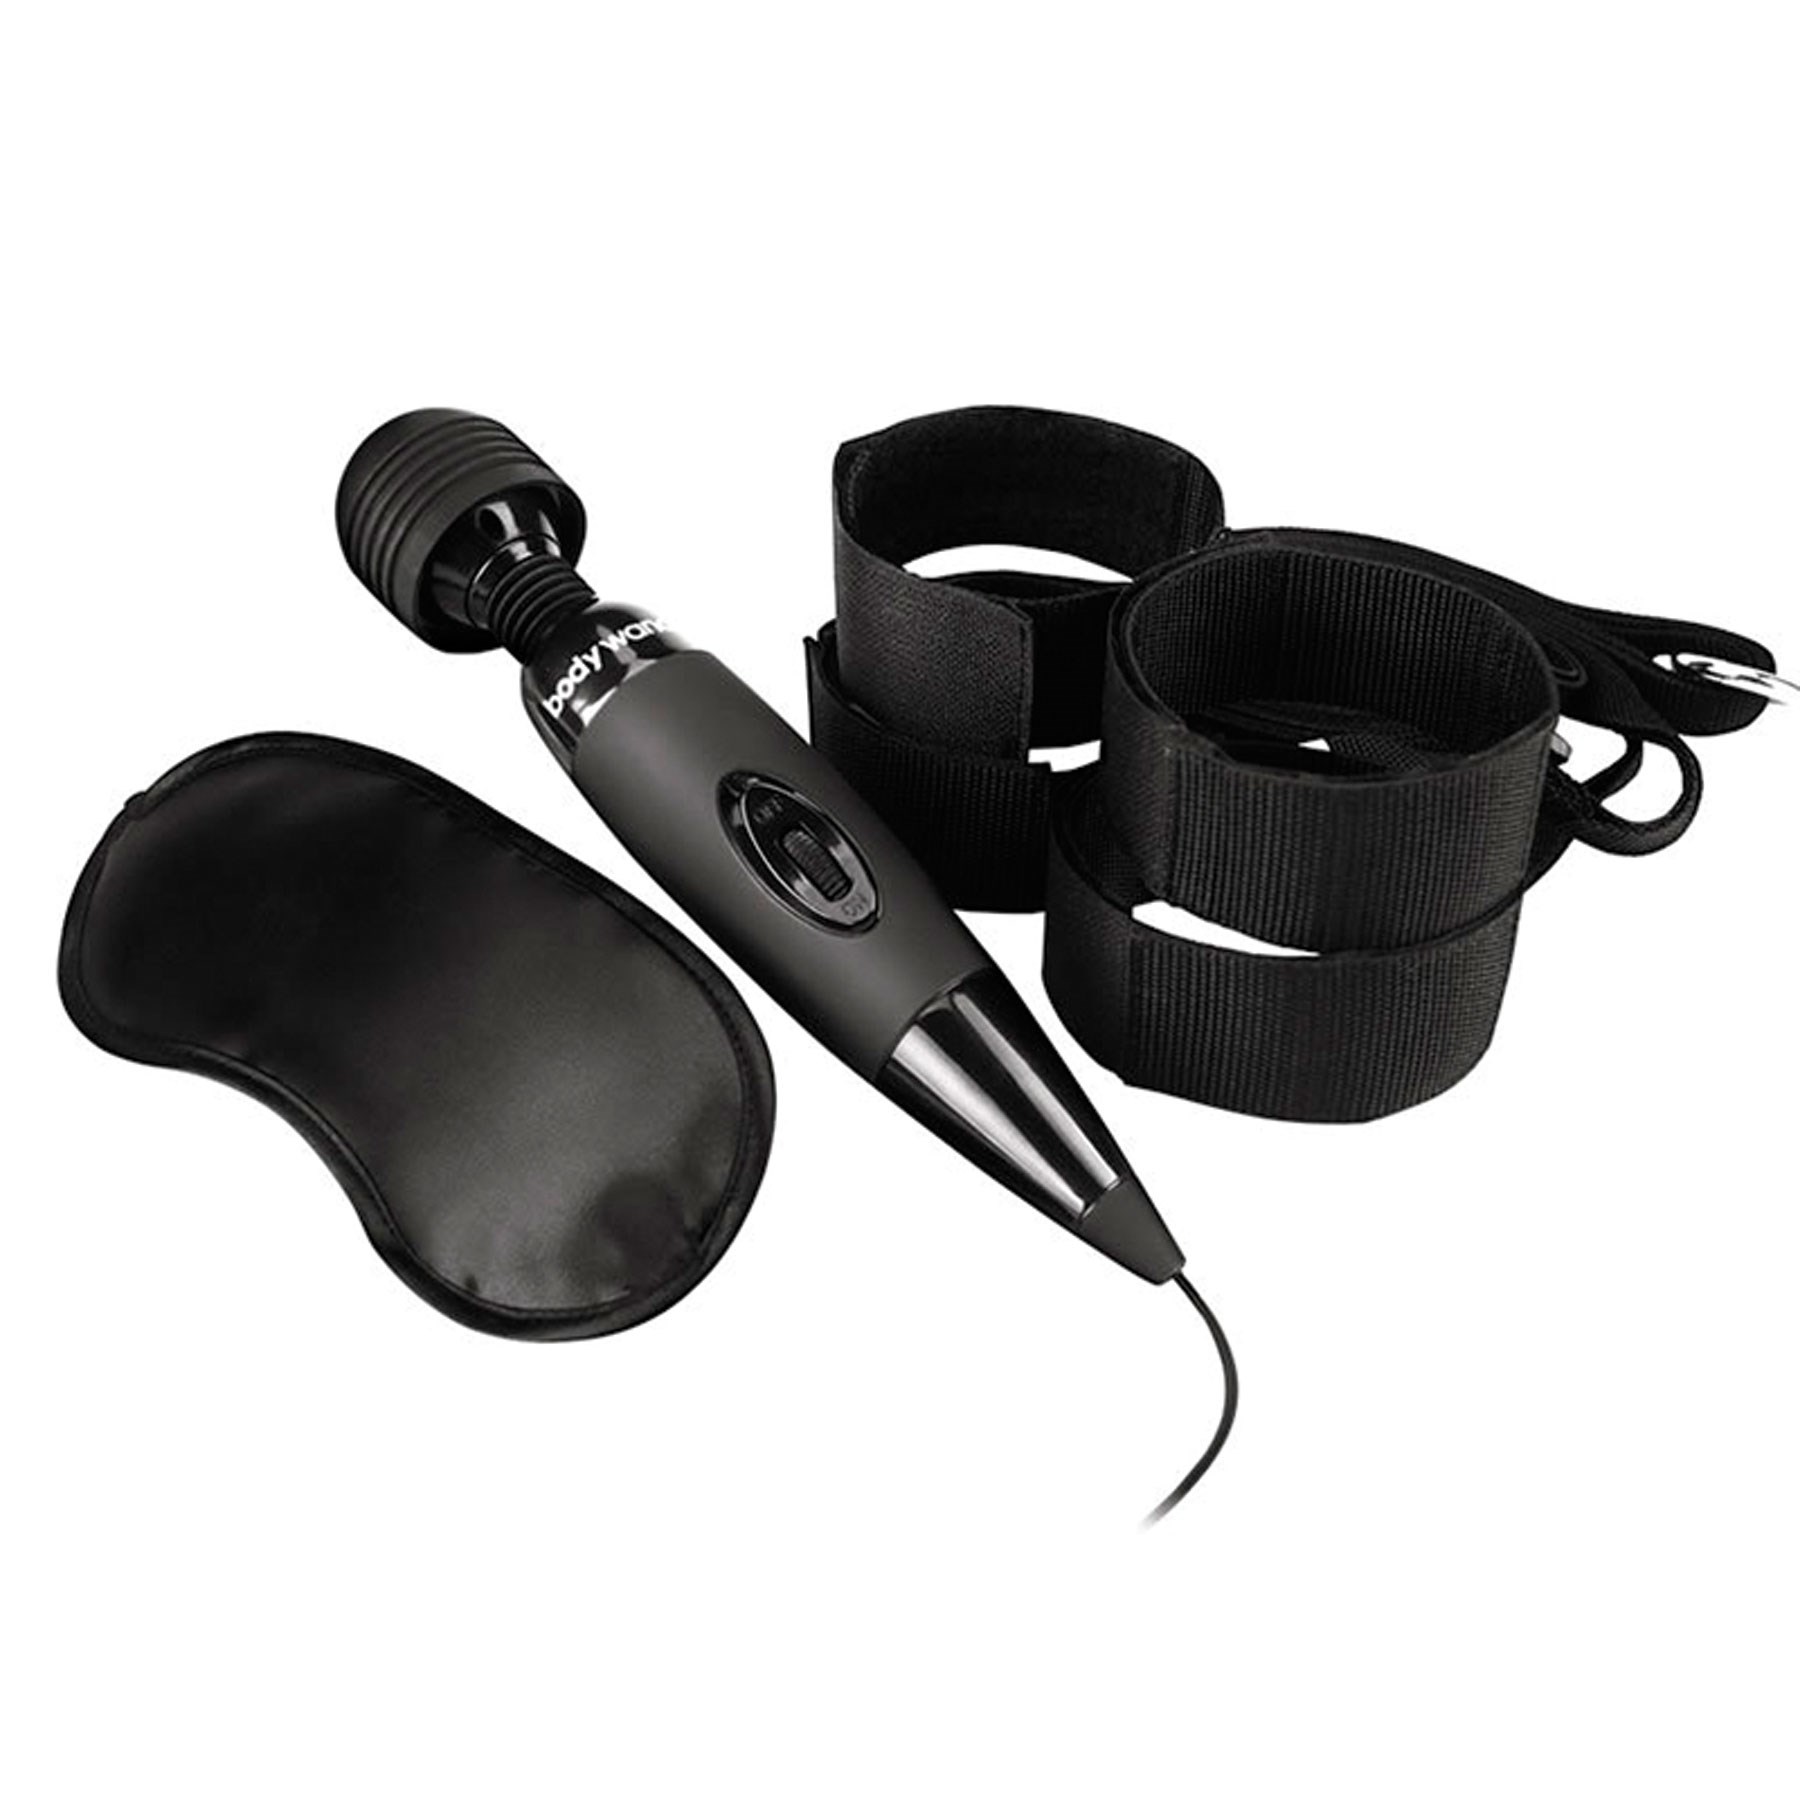 Bodywand Midnight Bed Spreader Kit with bondage cuffs and mask